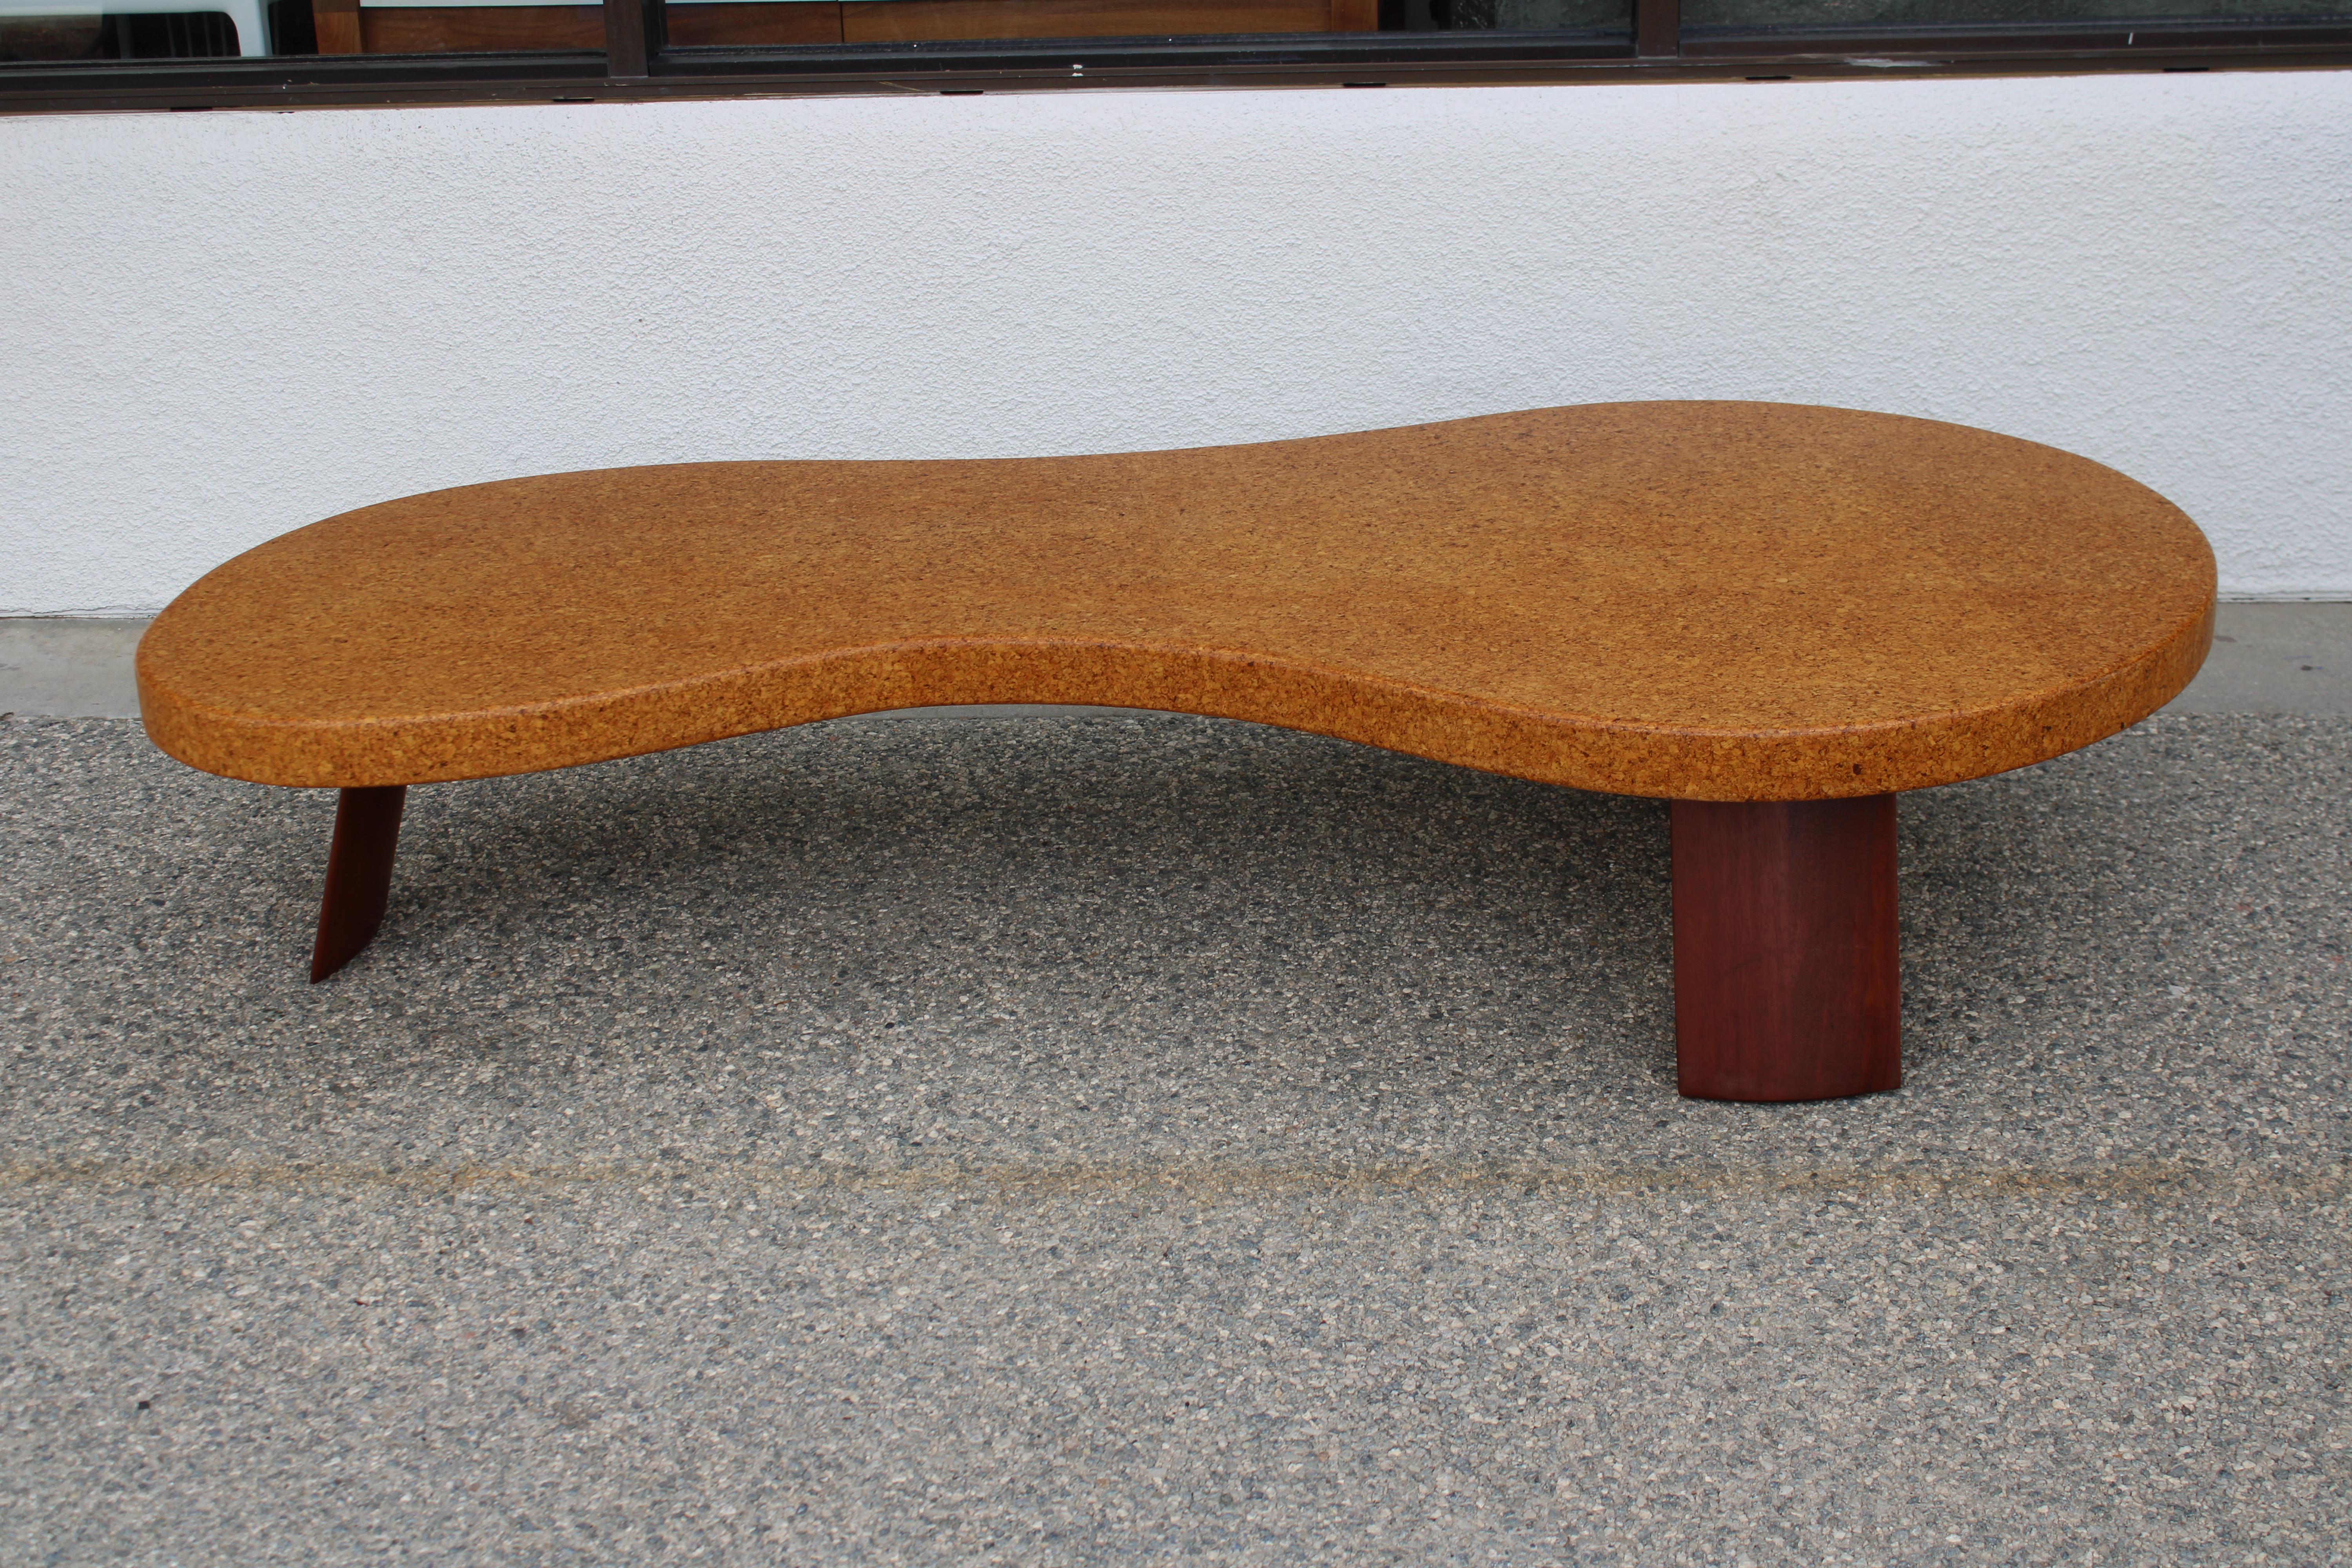 Paul T. Frankl (American/Austrian, 1886-1958) 'Bigfoot' coffee table, model 5028 for the Johnson Furniture Co. Lacquered cork and mahogany. Measuring 72